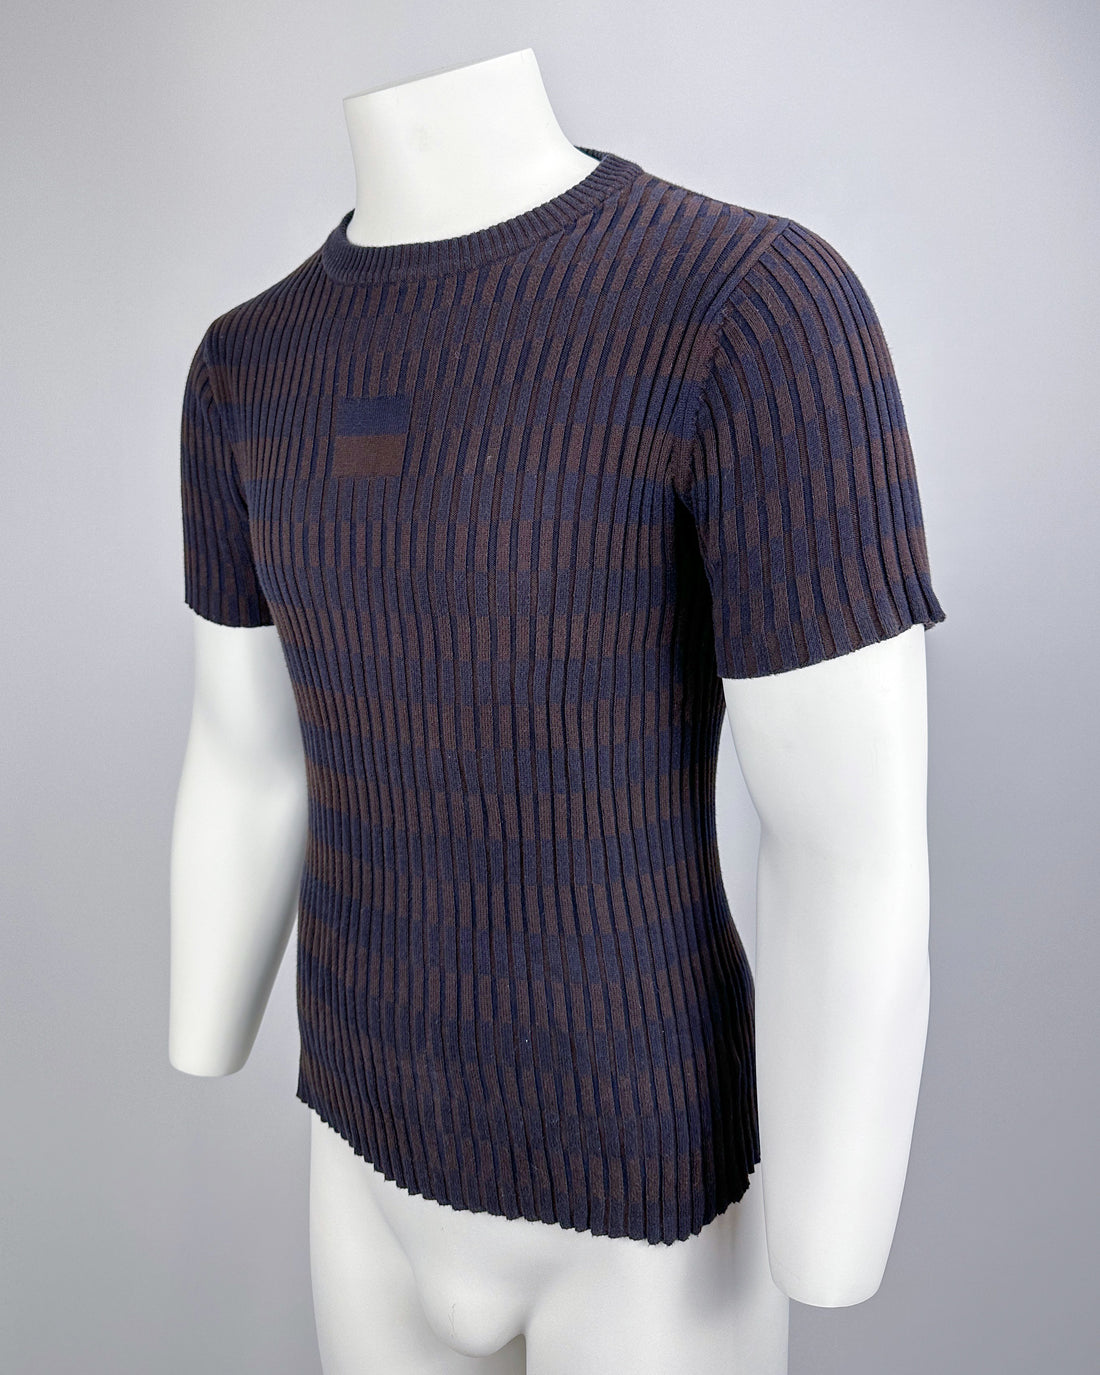 Marithé Francois Girbaud Stripped Knit Tee Top 2000's